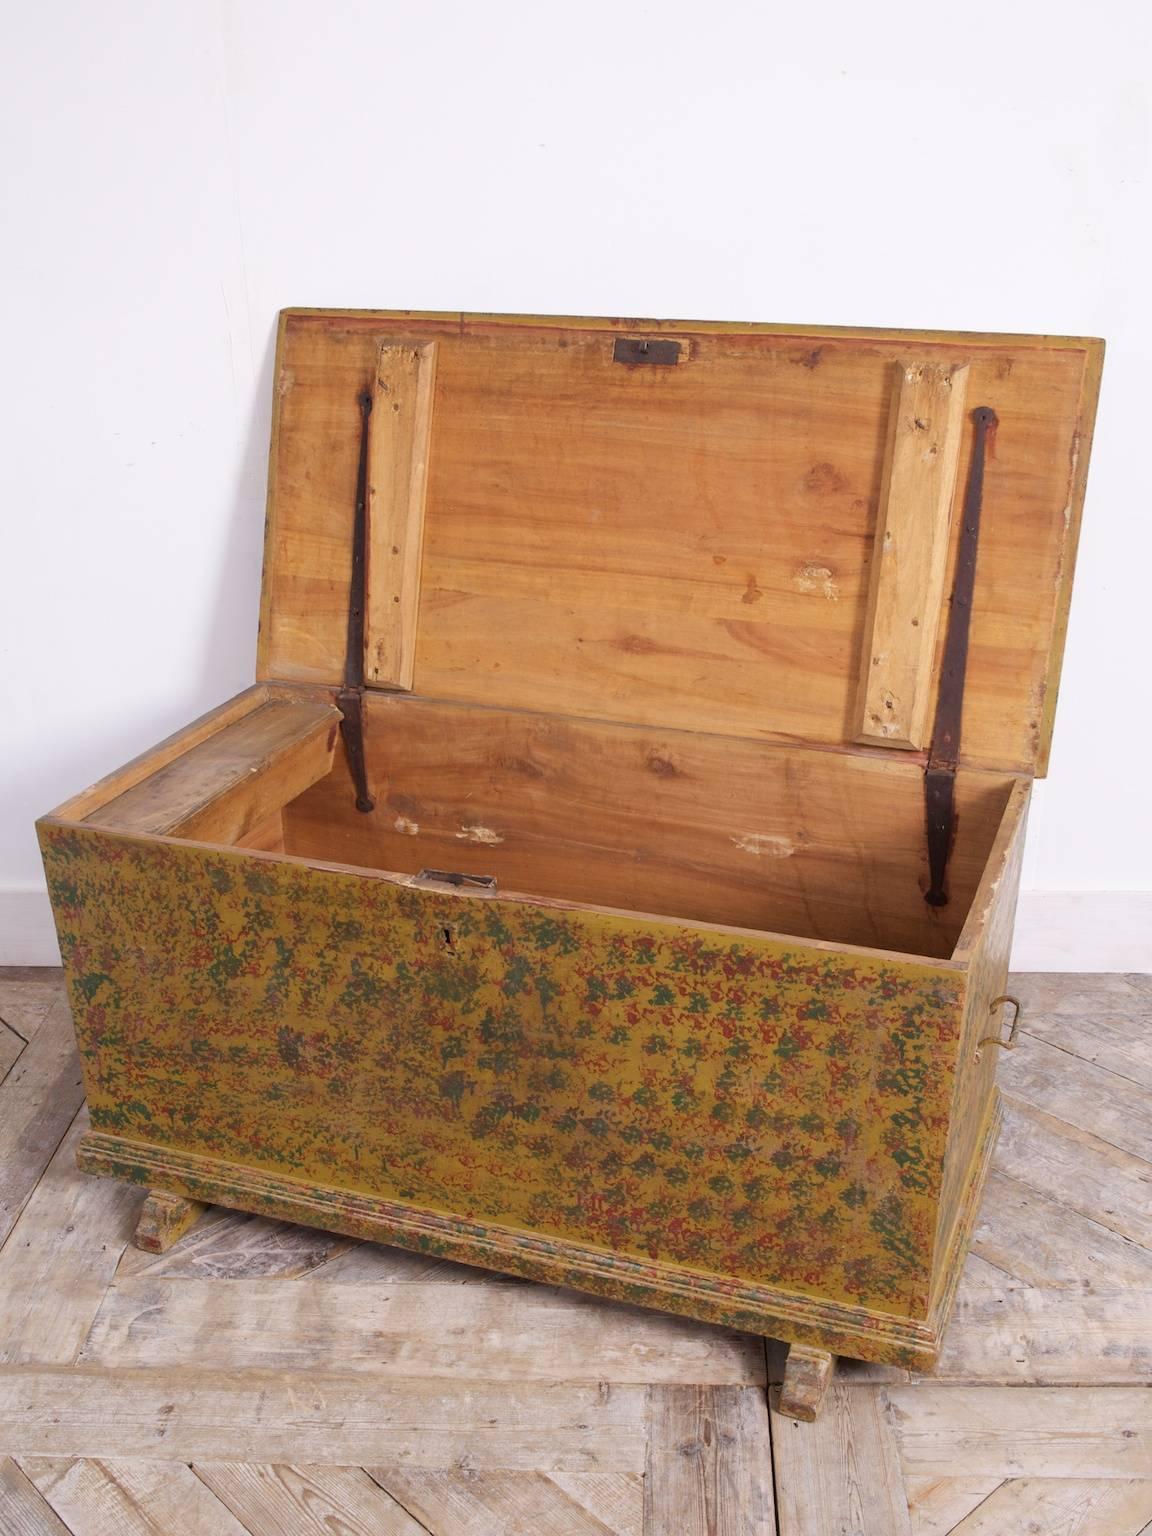 An exceptional, original painted pine trunk.

Made from large single sections of tropical hardwood and then highly decorated.

Candle box to the interior and two steel carrying handles to the sides.

European, circa 1860.